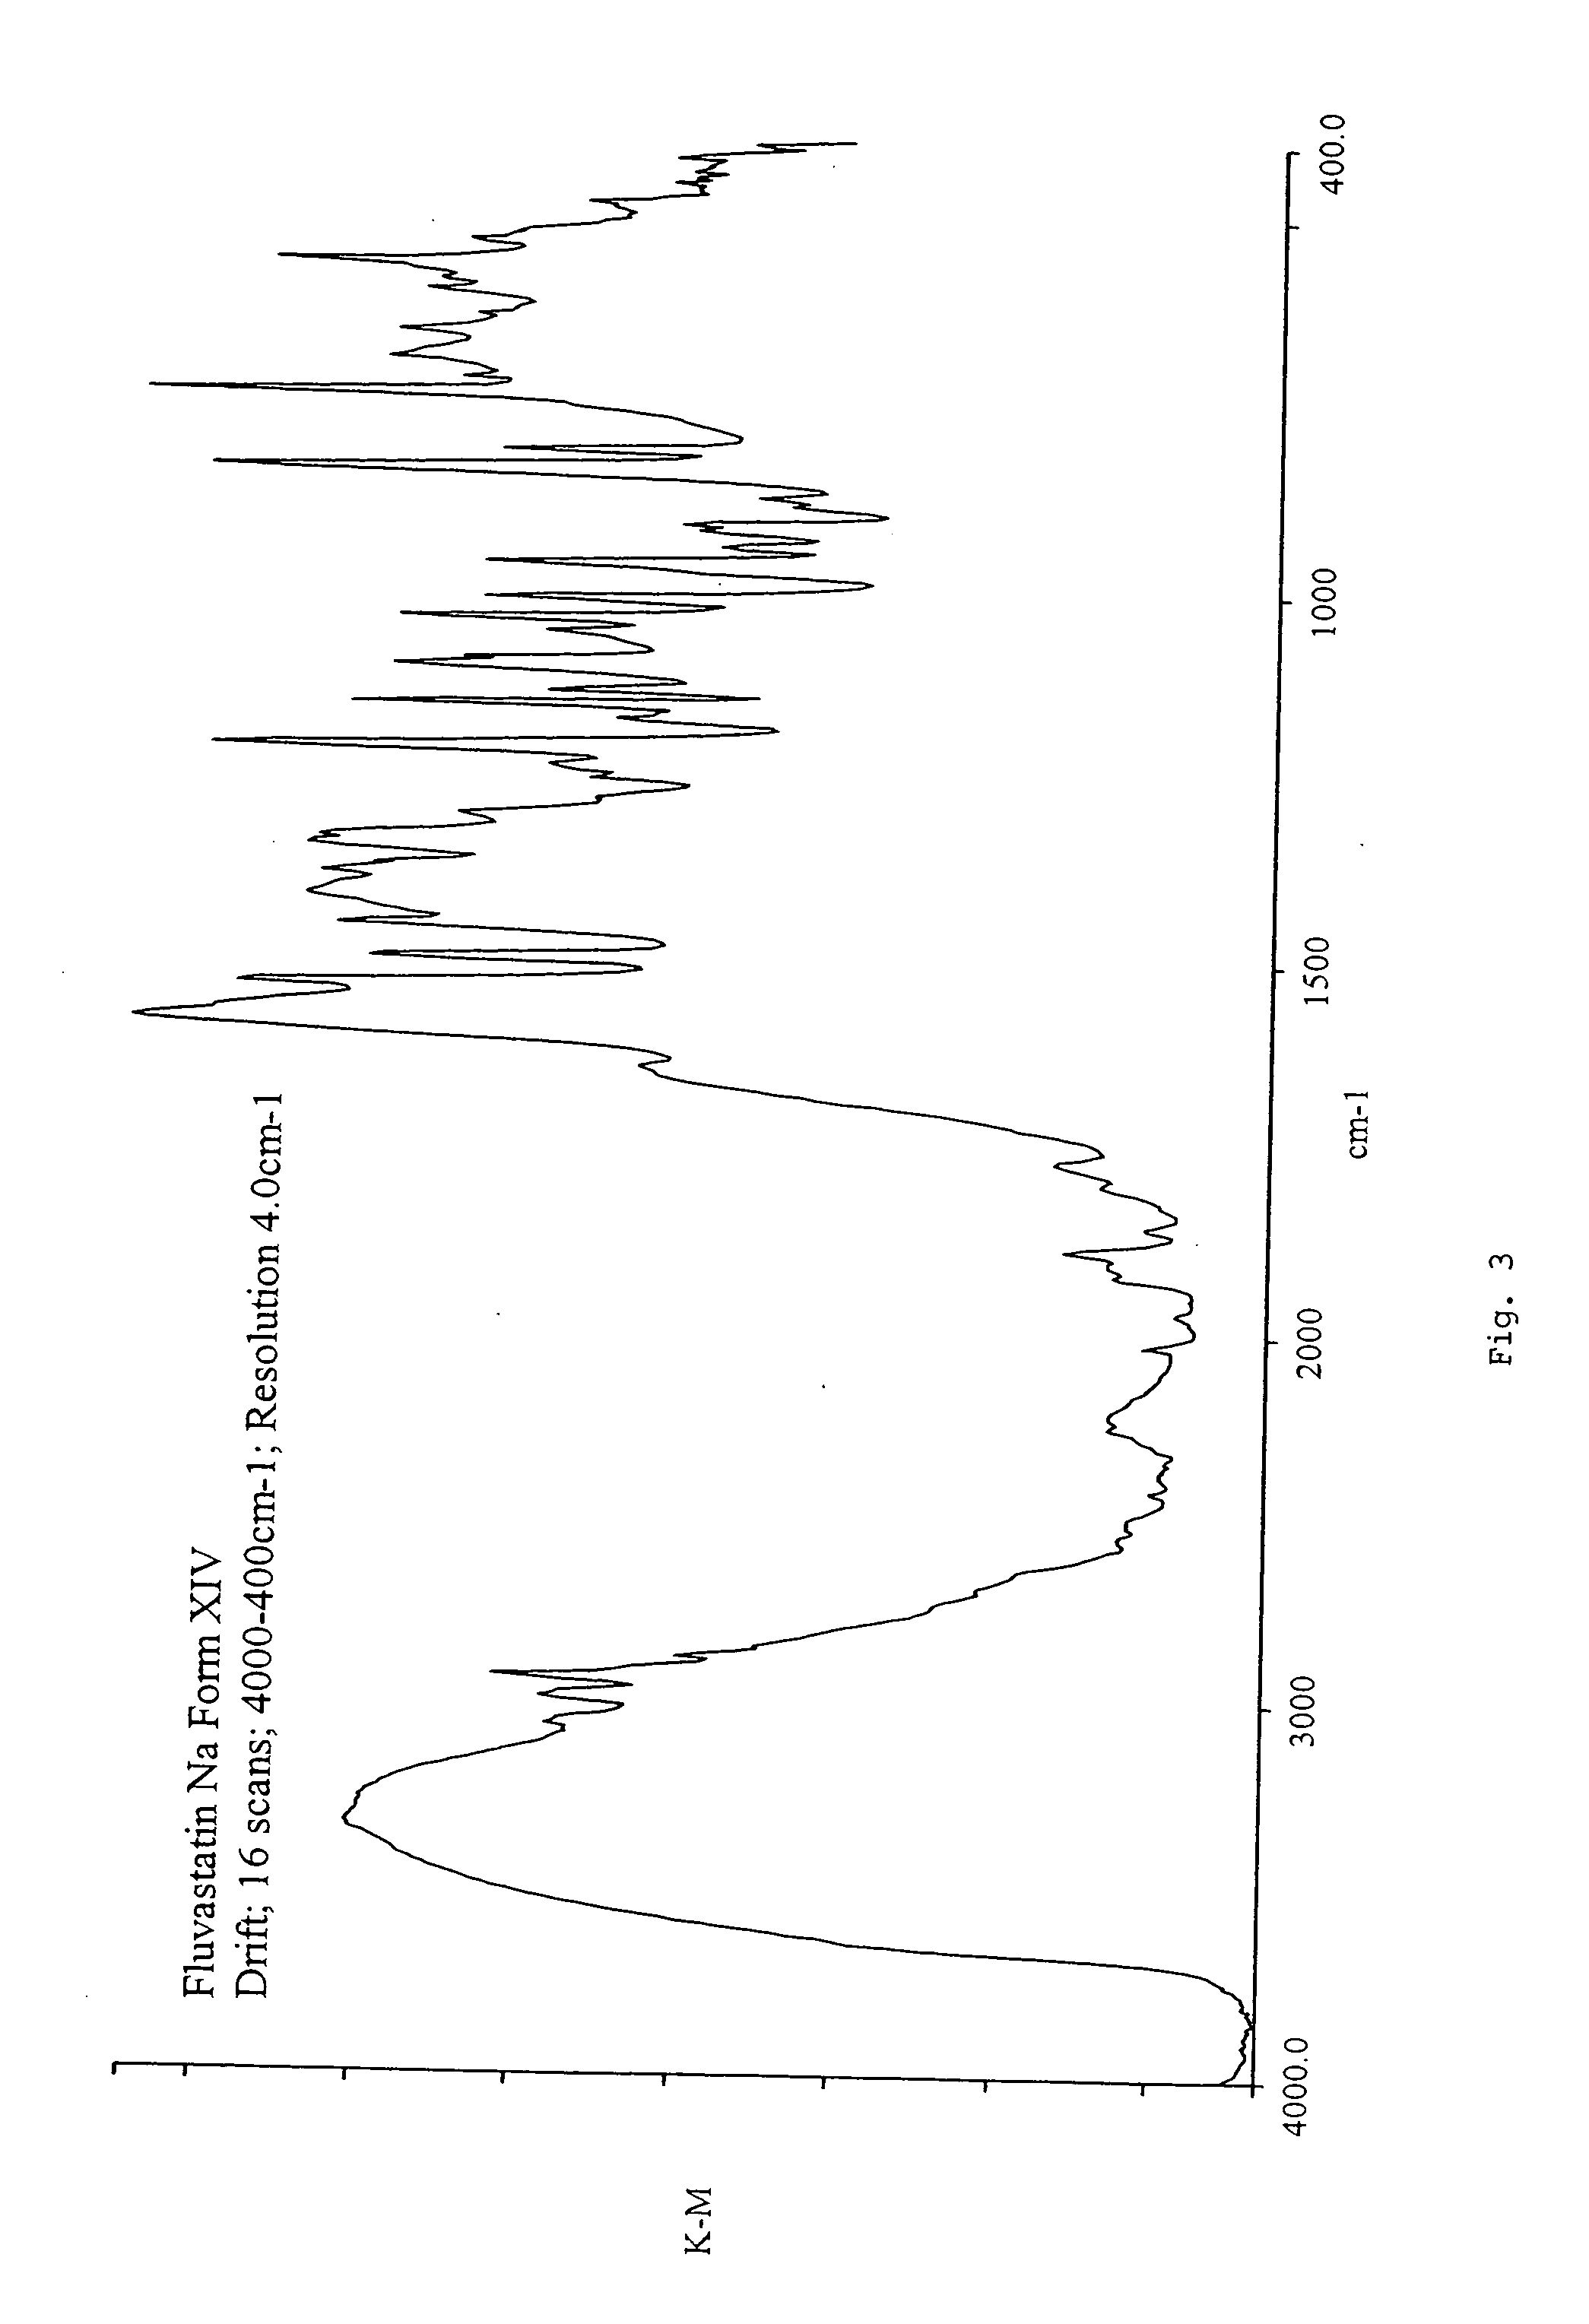 Fluvastatin sodium crystal forms XIV, LXXIII, LXXIX, LXXX and LXXXVII, processes for preparing them, compositions containing them and methods of using them